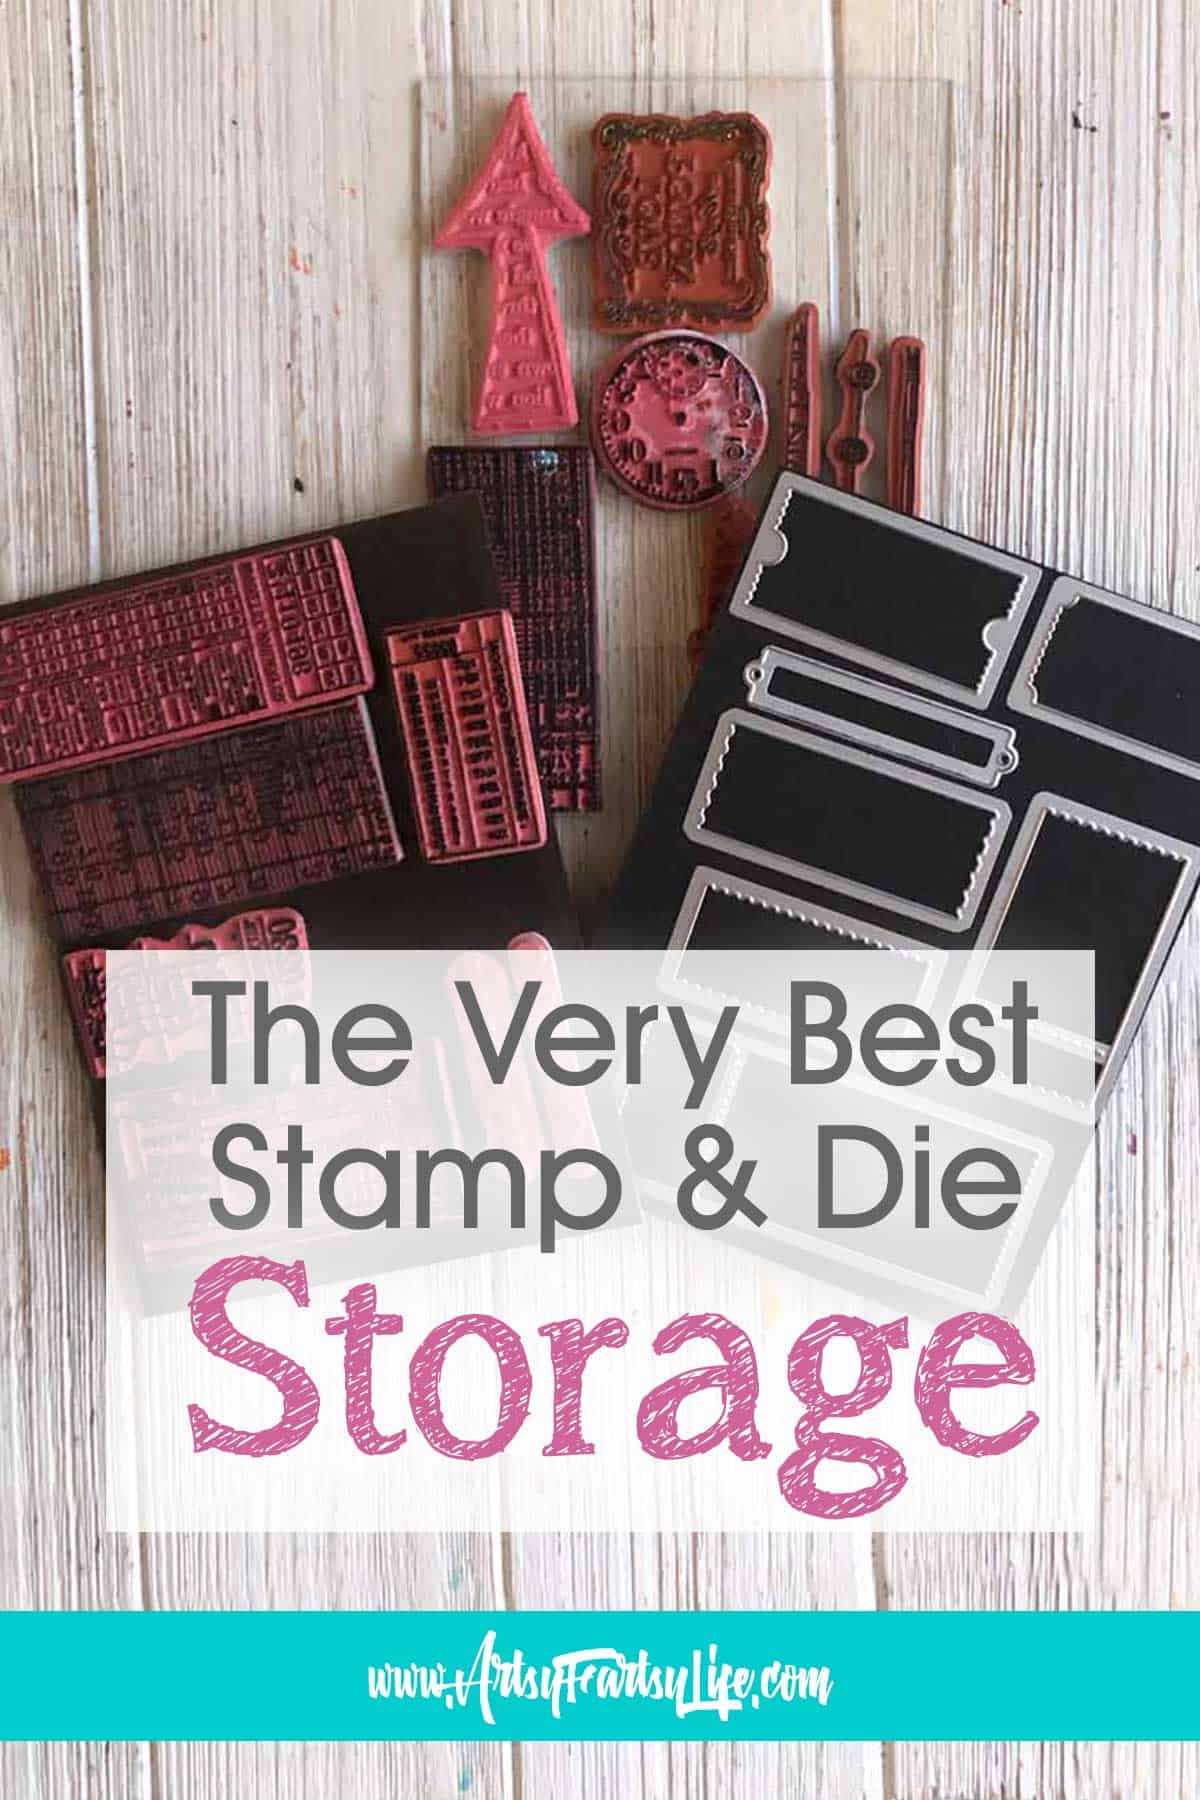 Stamp-n-Storage  Organizing for paper crafters so there's more time for  what you love!